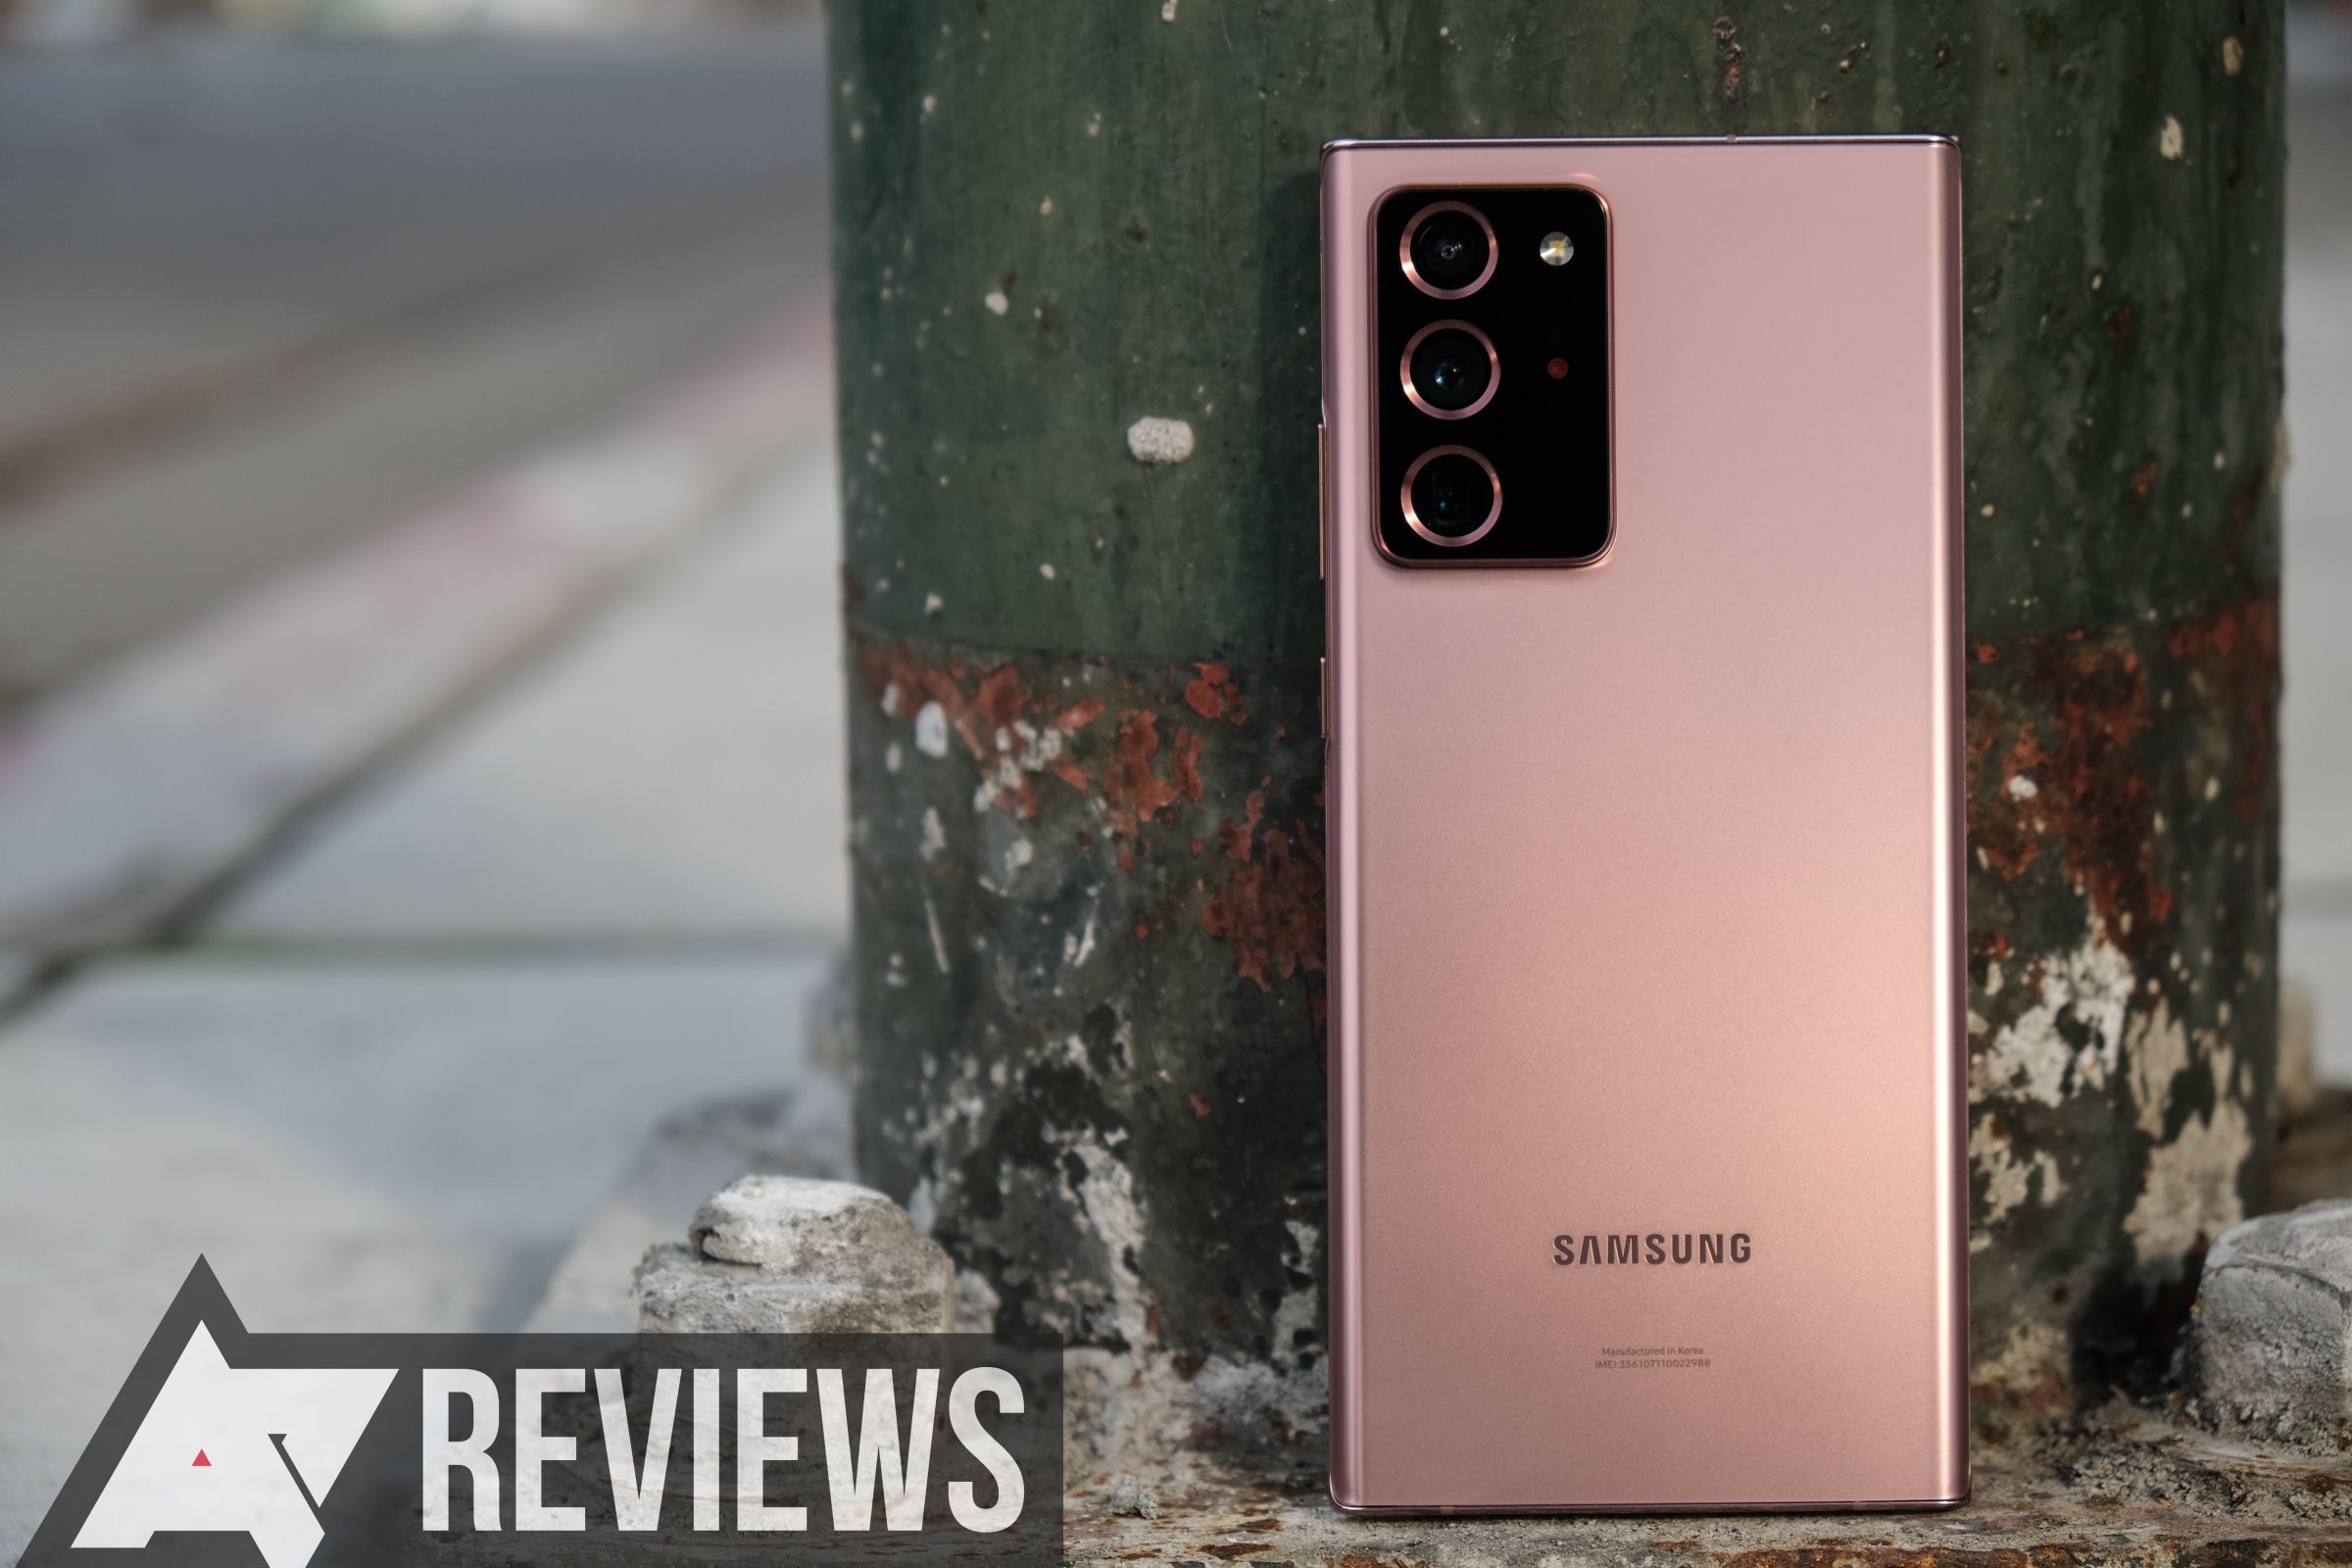 Samsung Galaxy S20 Ultra review: To be or 'Note' to be